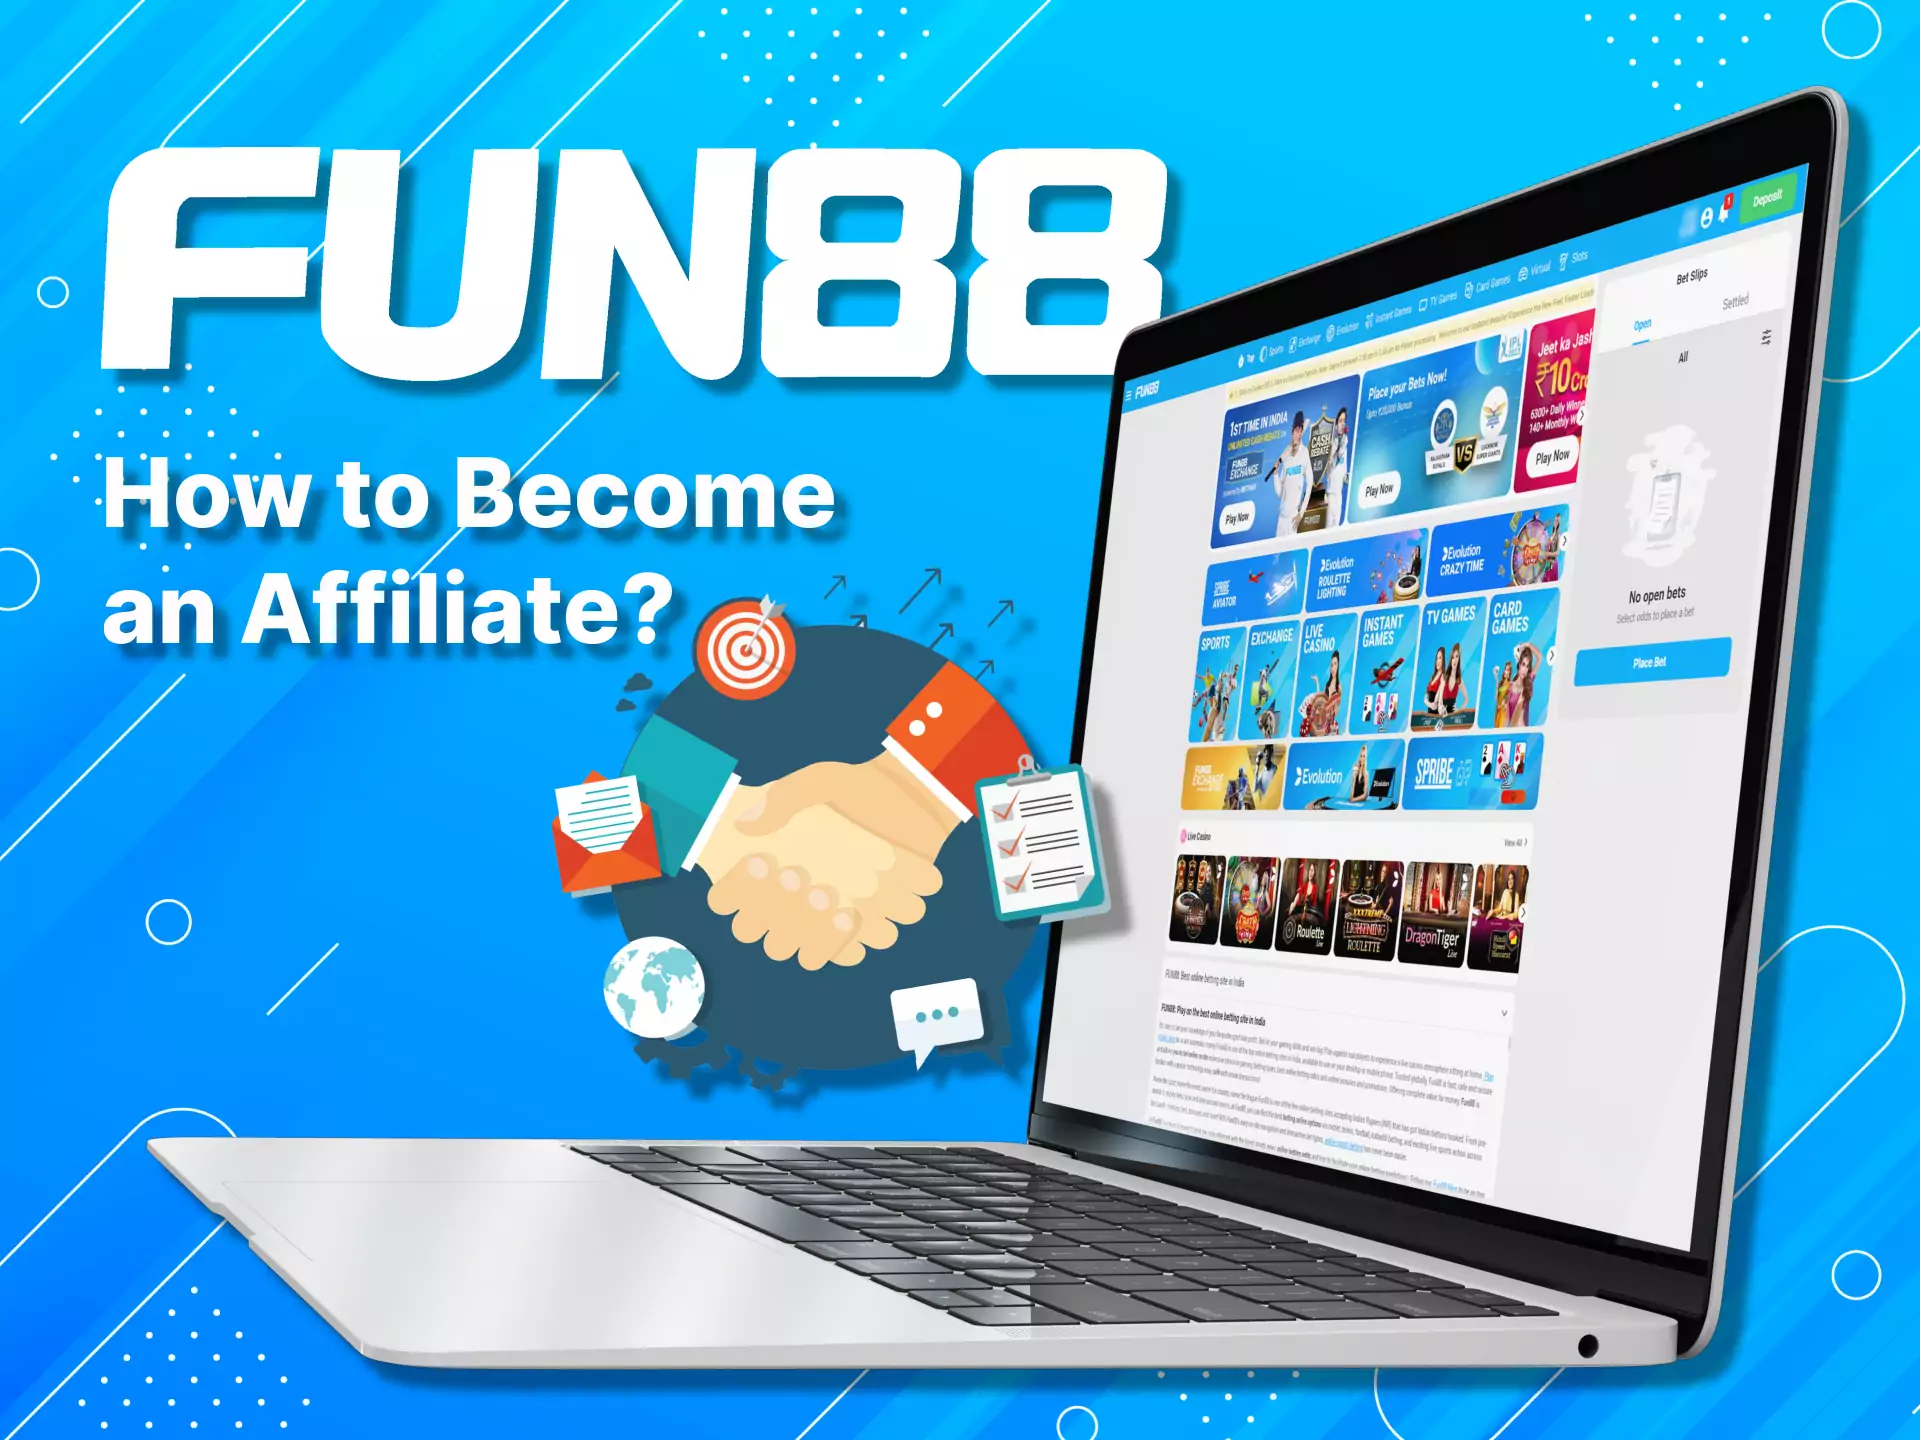 Find out how quickly you can become part of the Fun88 Affiliate Program.